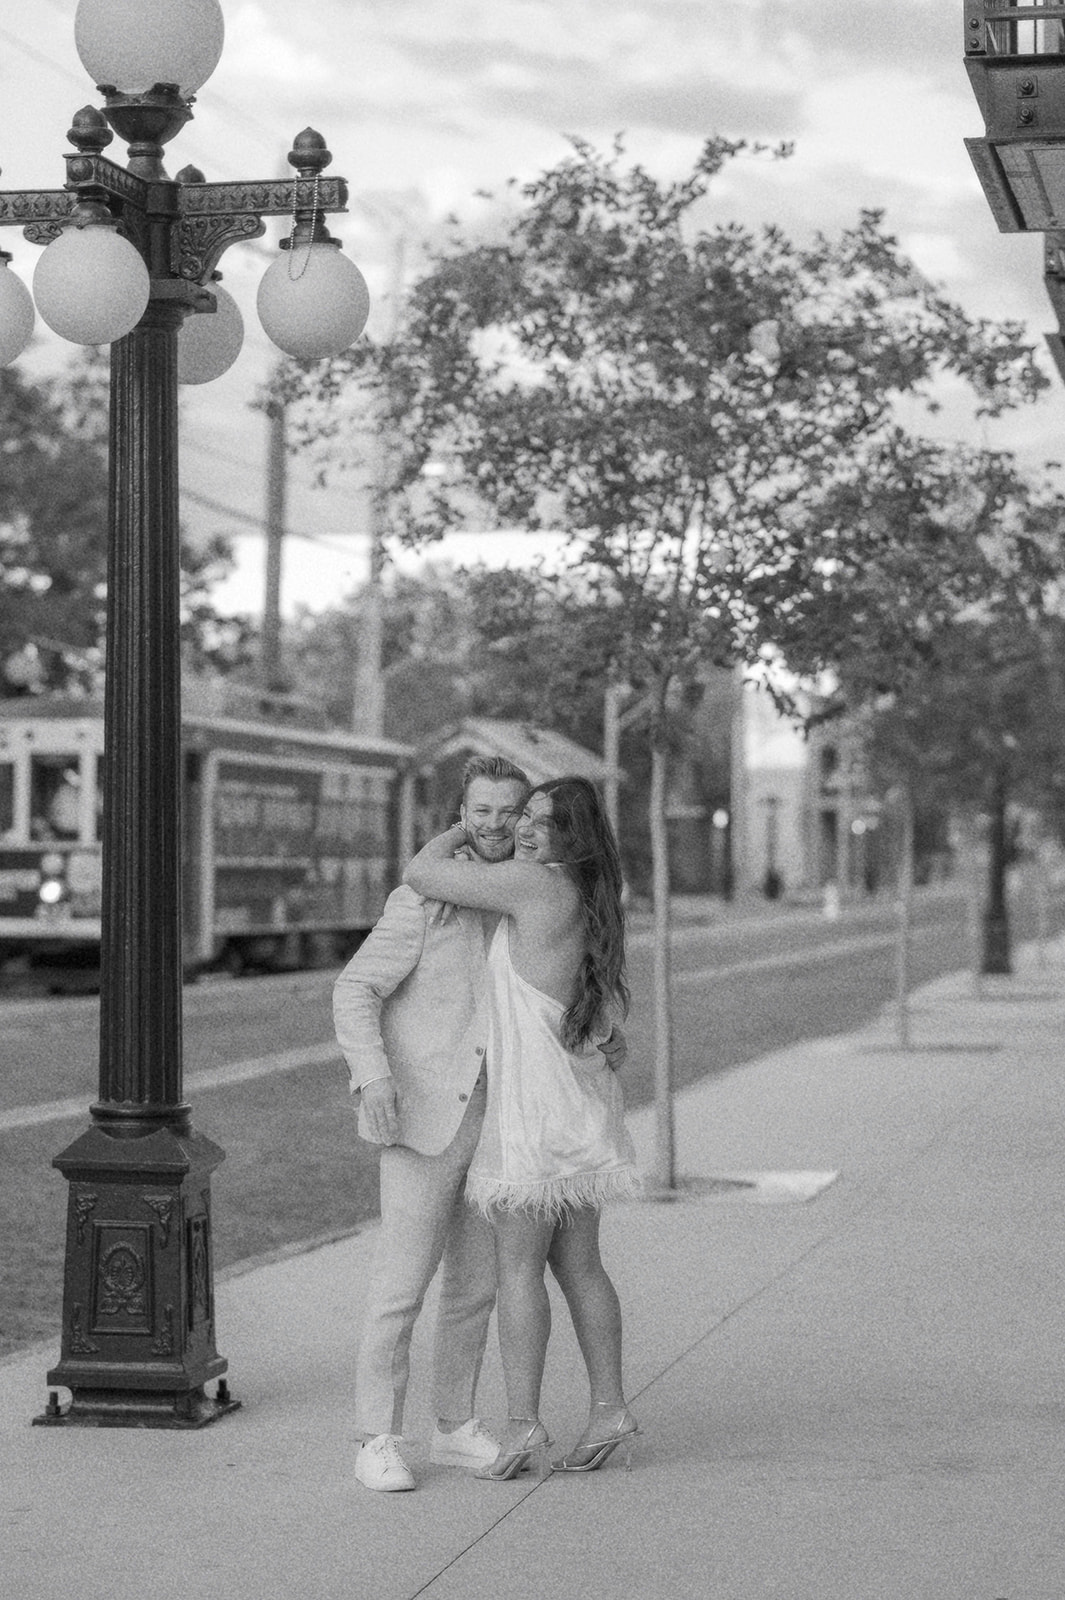 "Couple embracing in Ybor City, Tampa during engagement shoot"
